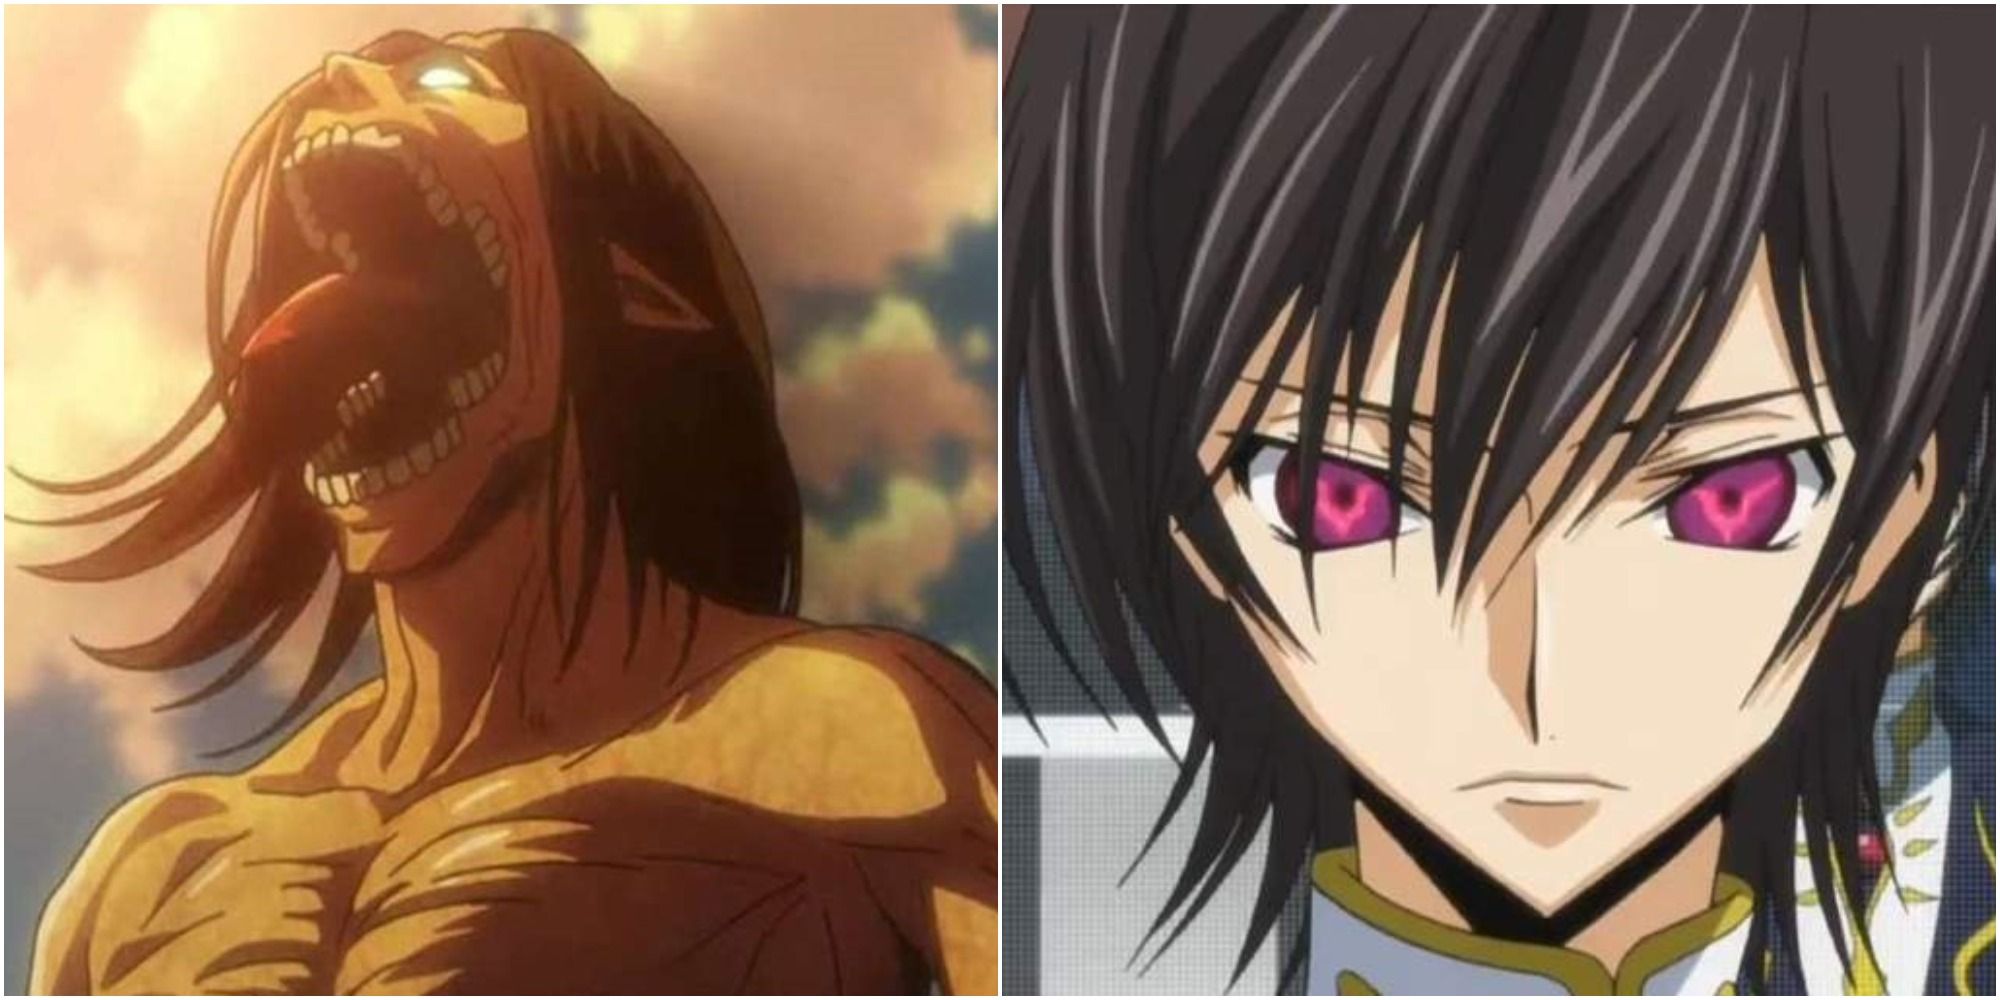 attack titan and lelouch geass